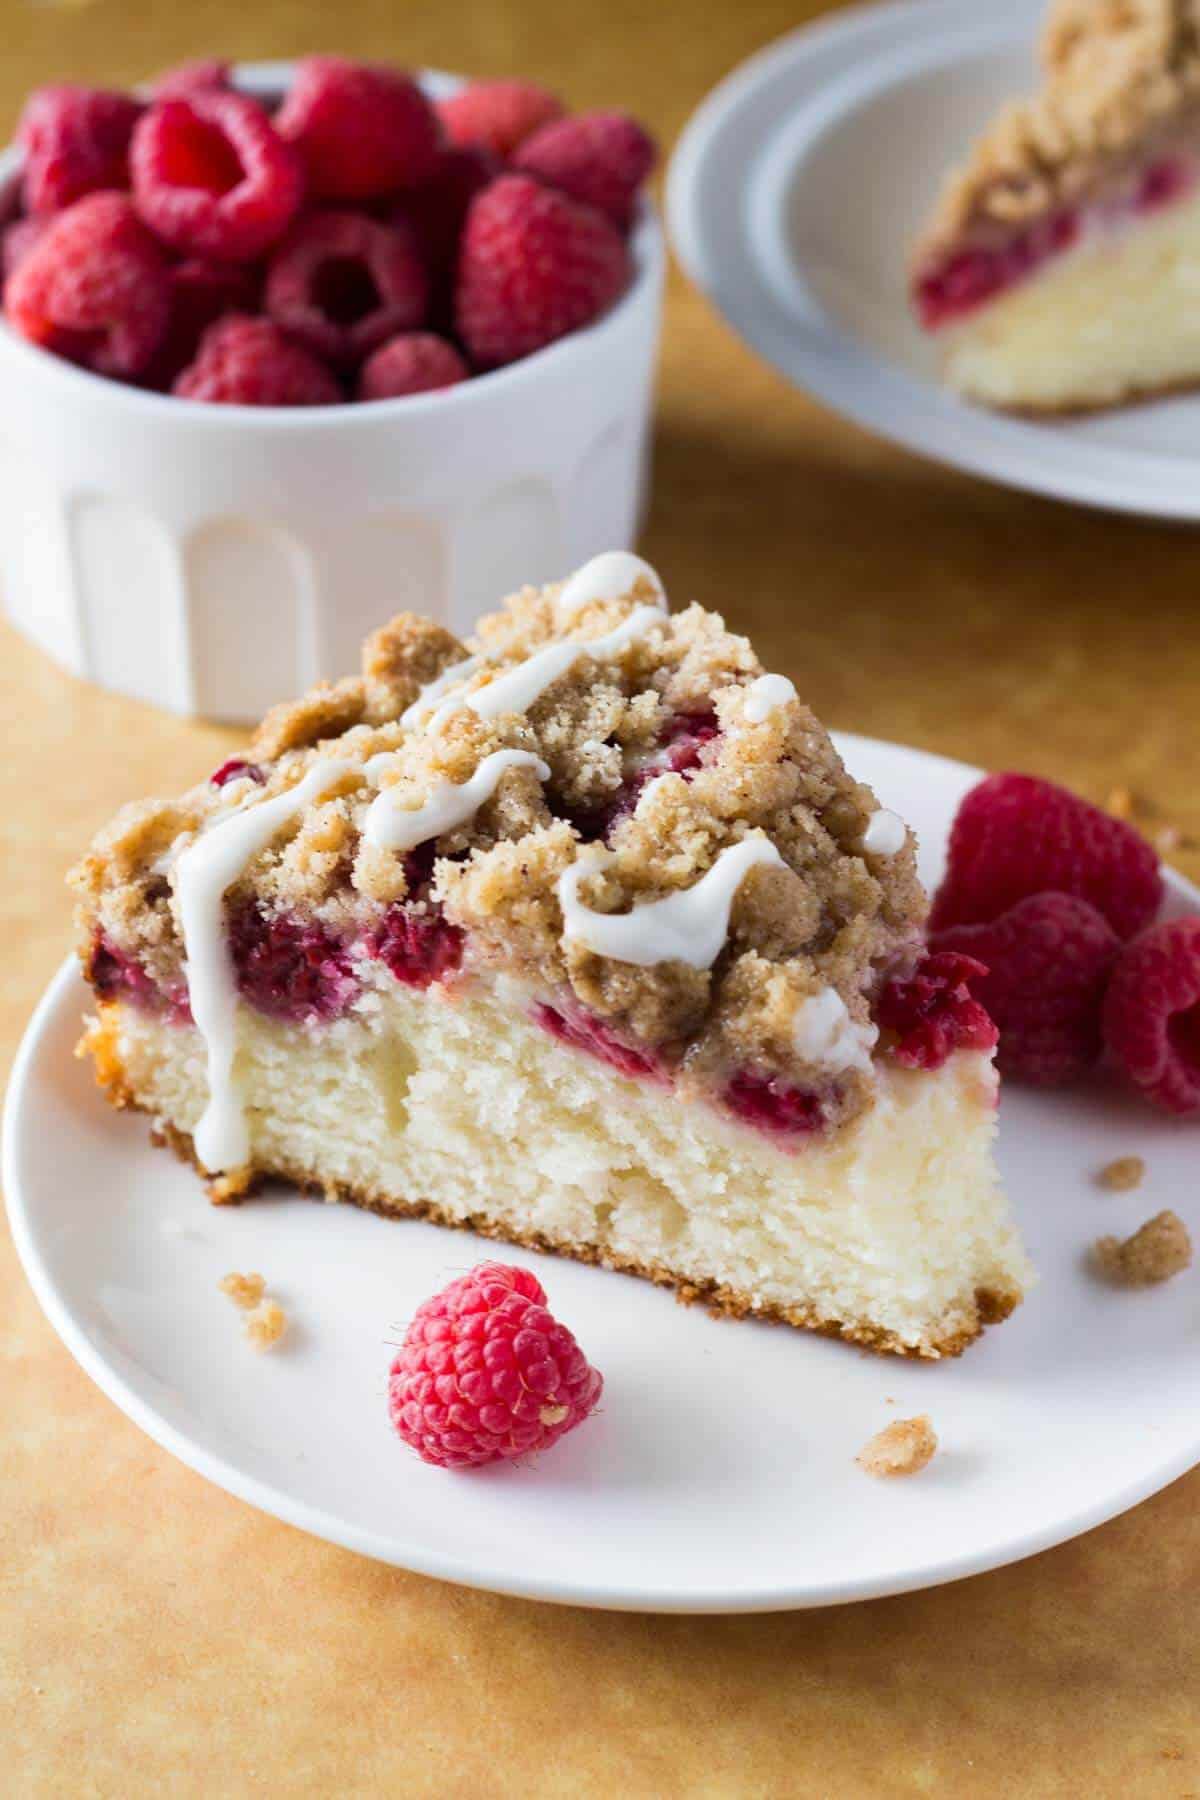 Rich, buttery, perfectly moist Raspberry Coffee Cake with Streusel Topping and Vanilla Glaze! So perfect for breakfast or brunch!